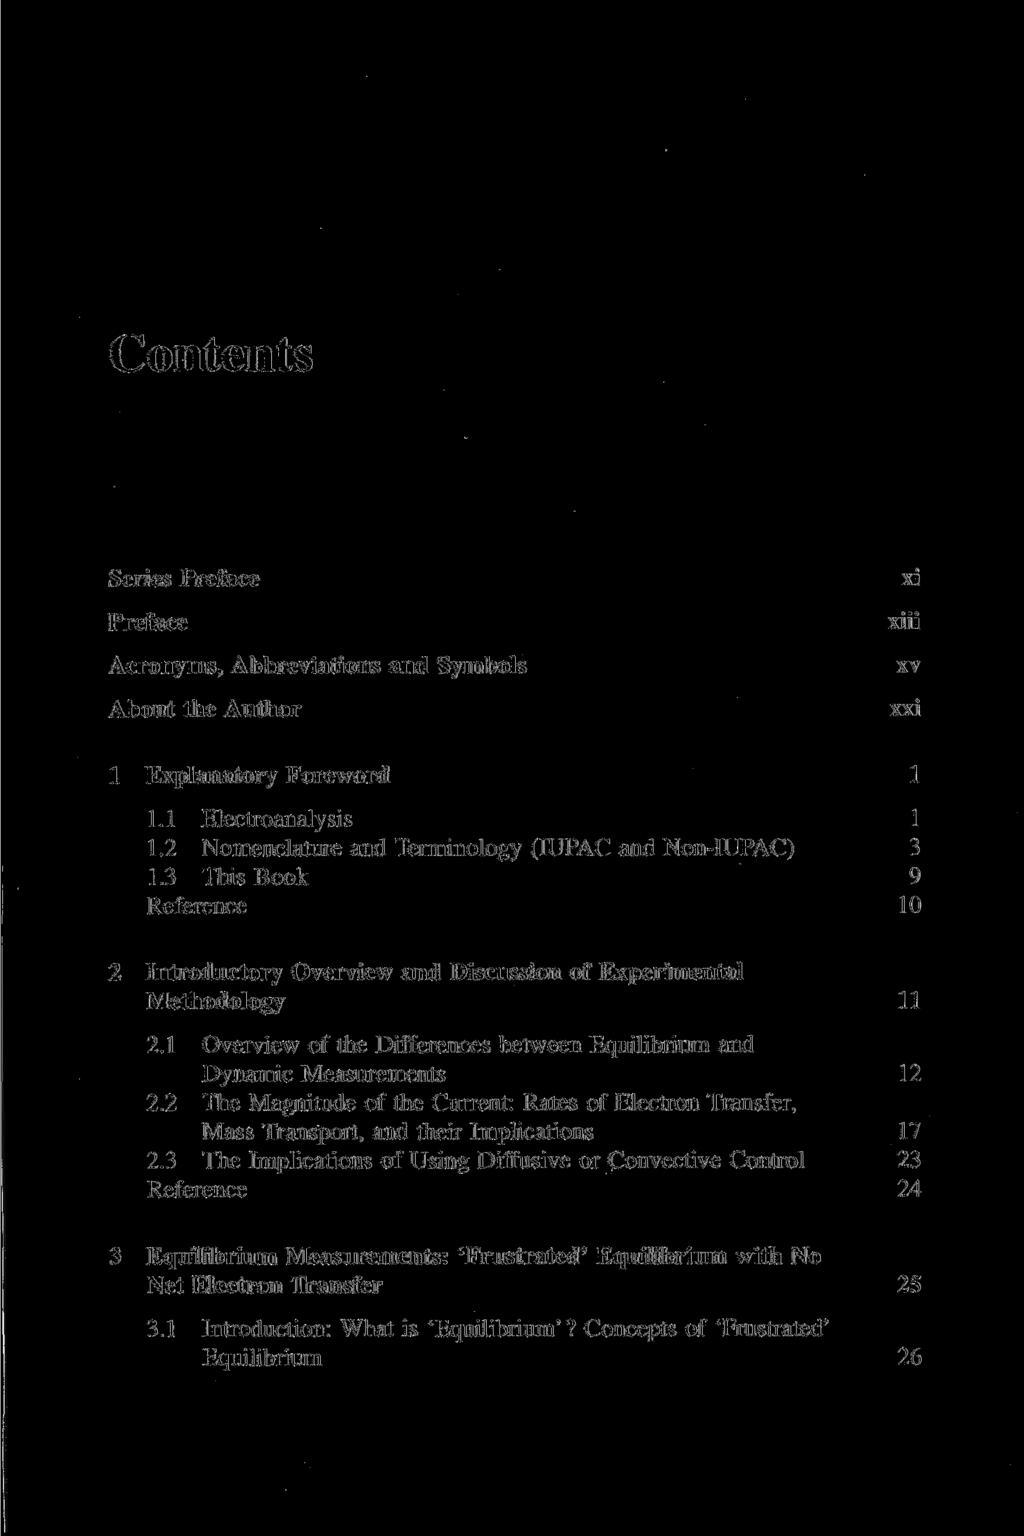 Contents Series Preface Preface Acronyms, Abbreviations and Symbols About the Author xi xiii xv xxi 1 Explanatory Foreword 1 1.1 Electroanalysis 1 1.